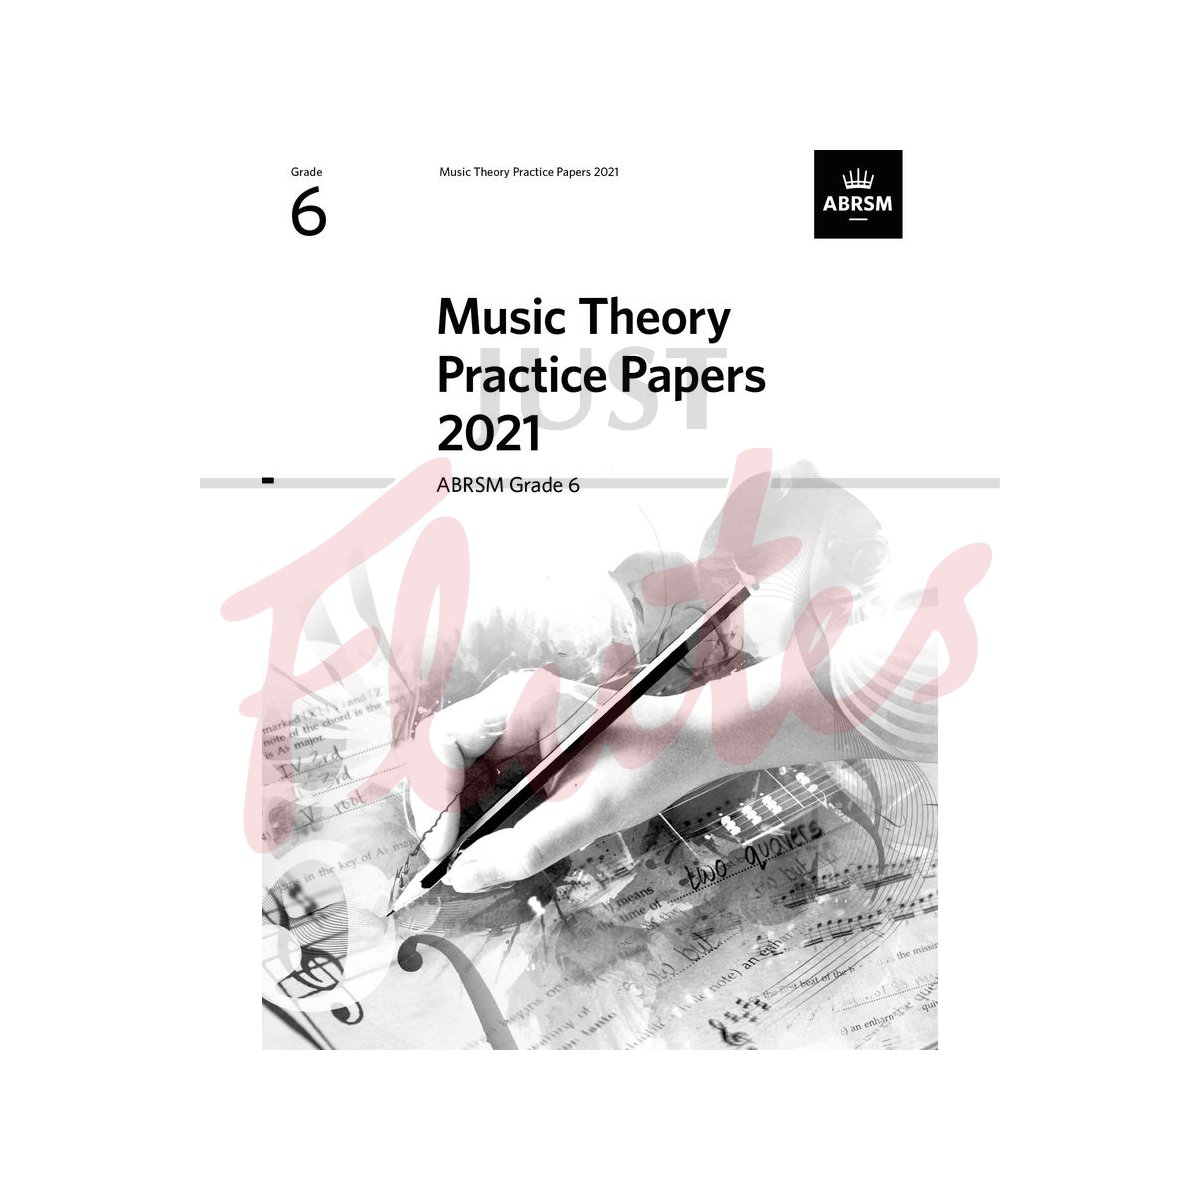 Music Theory Practice Papers 2021 Grade 6